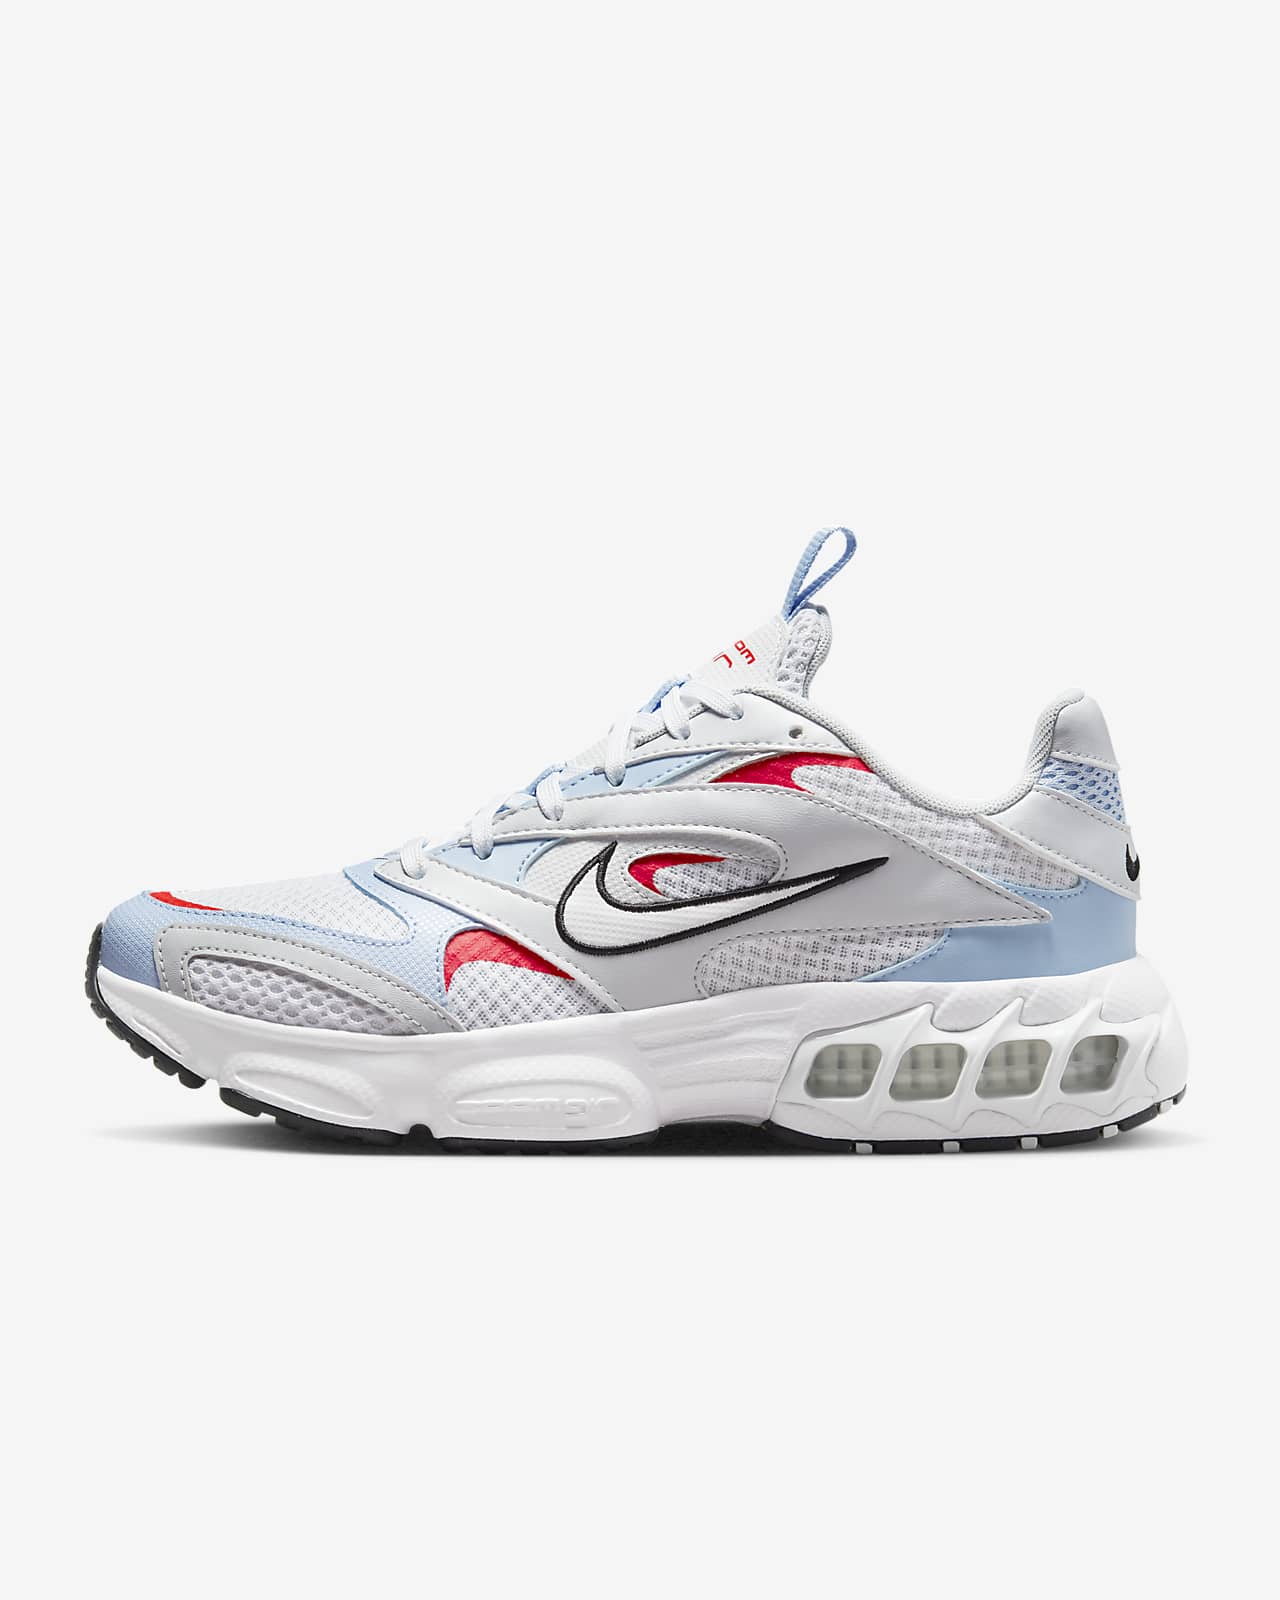 On a large scale gallon Ambiguous Nike Zoom Air Fire Women's Shoes. Nike.com